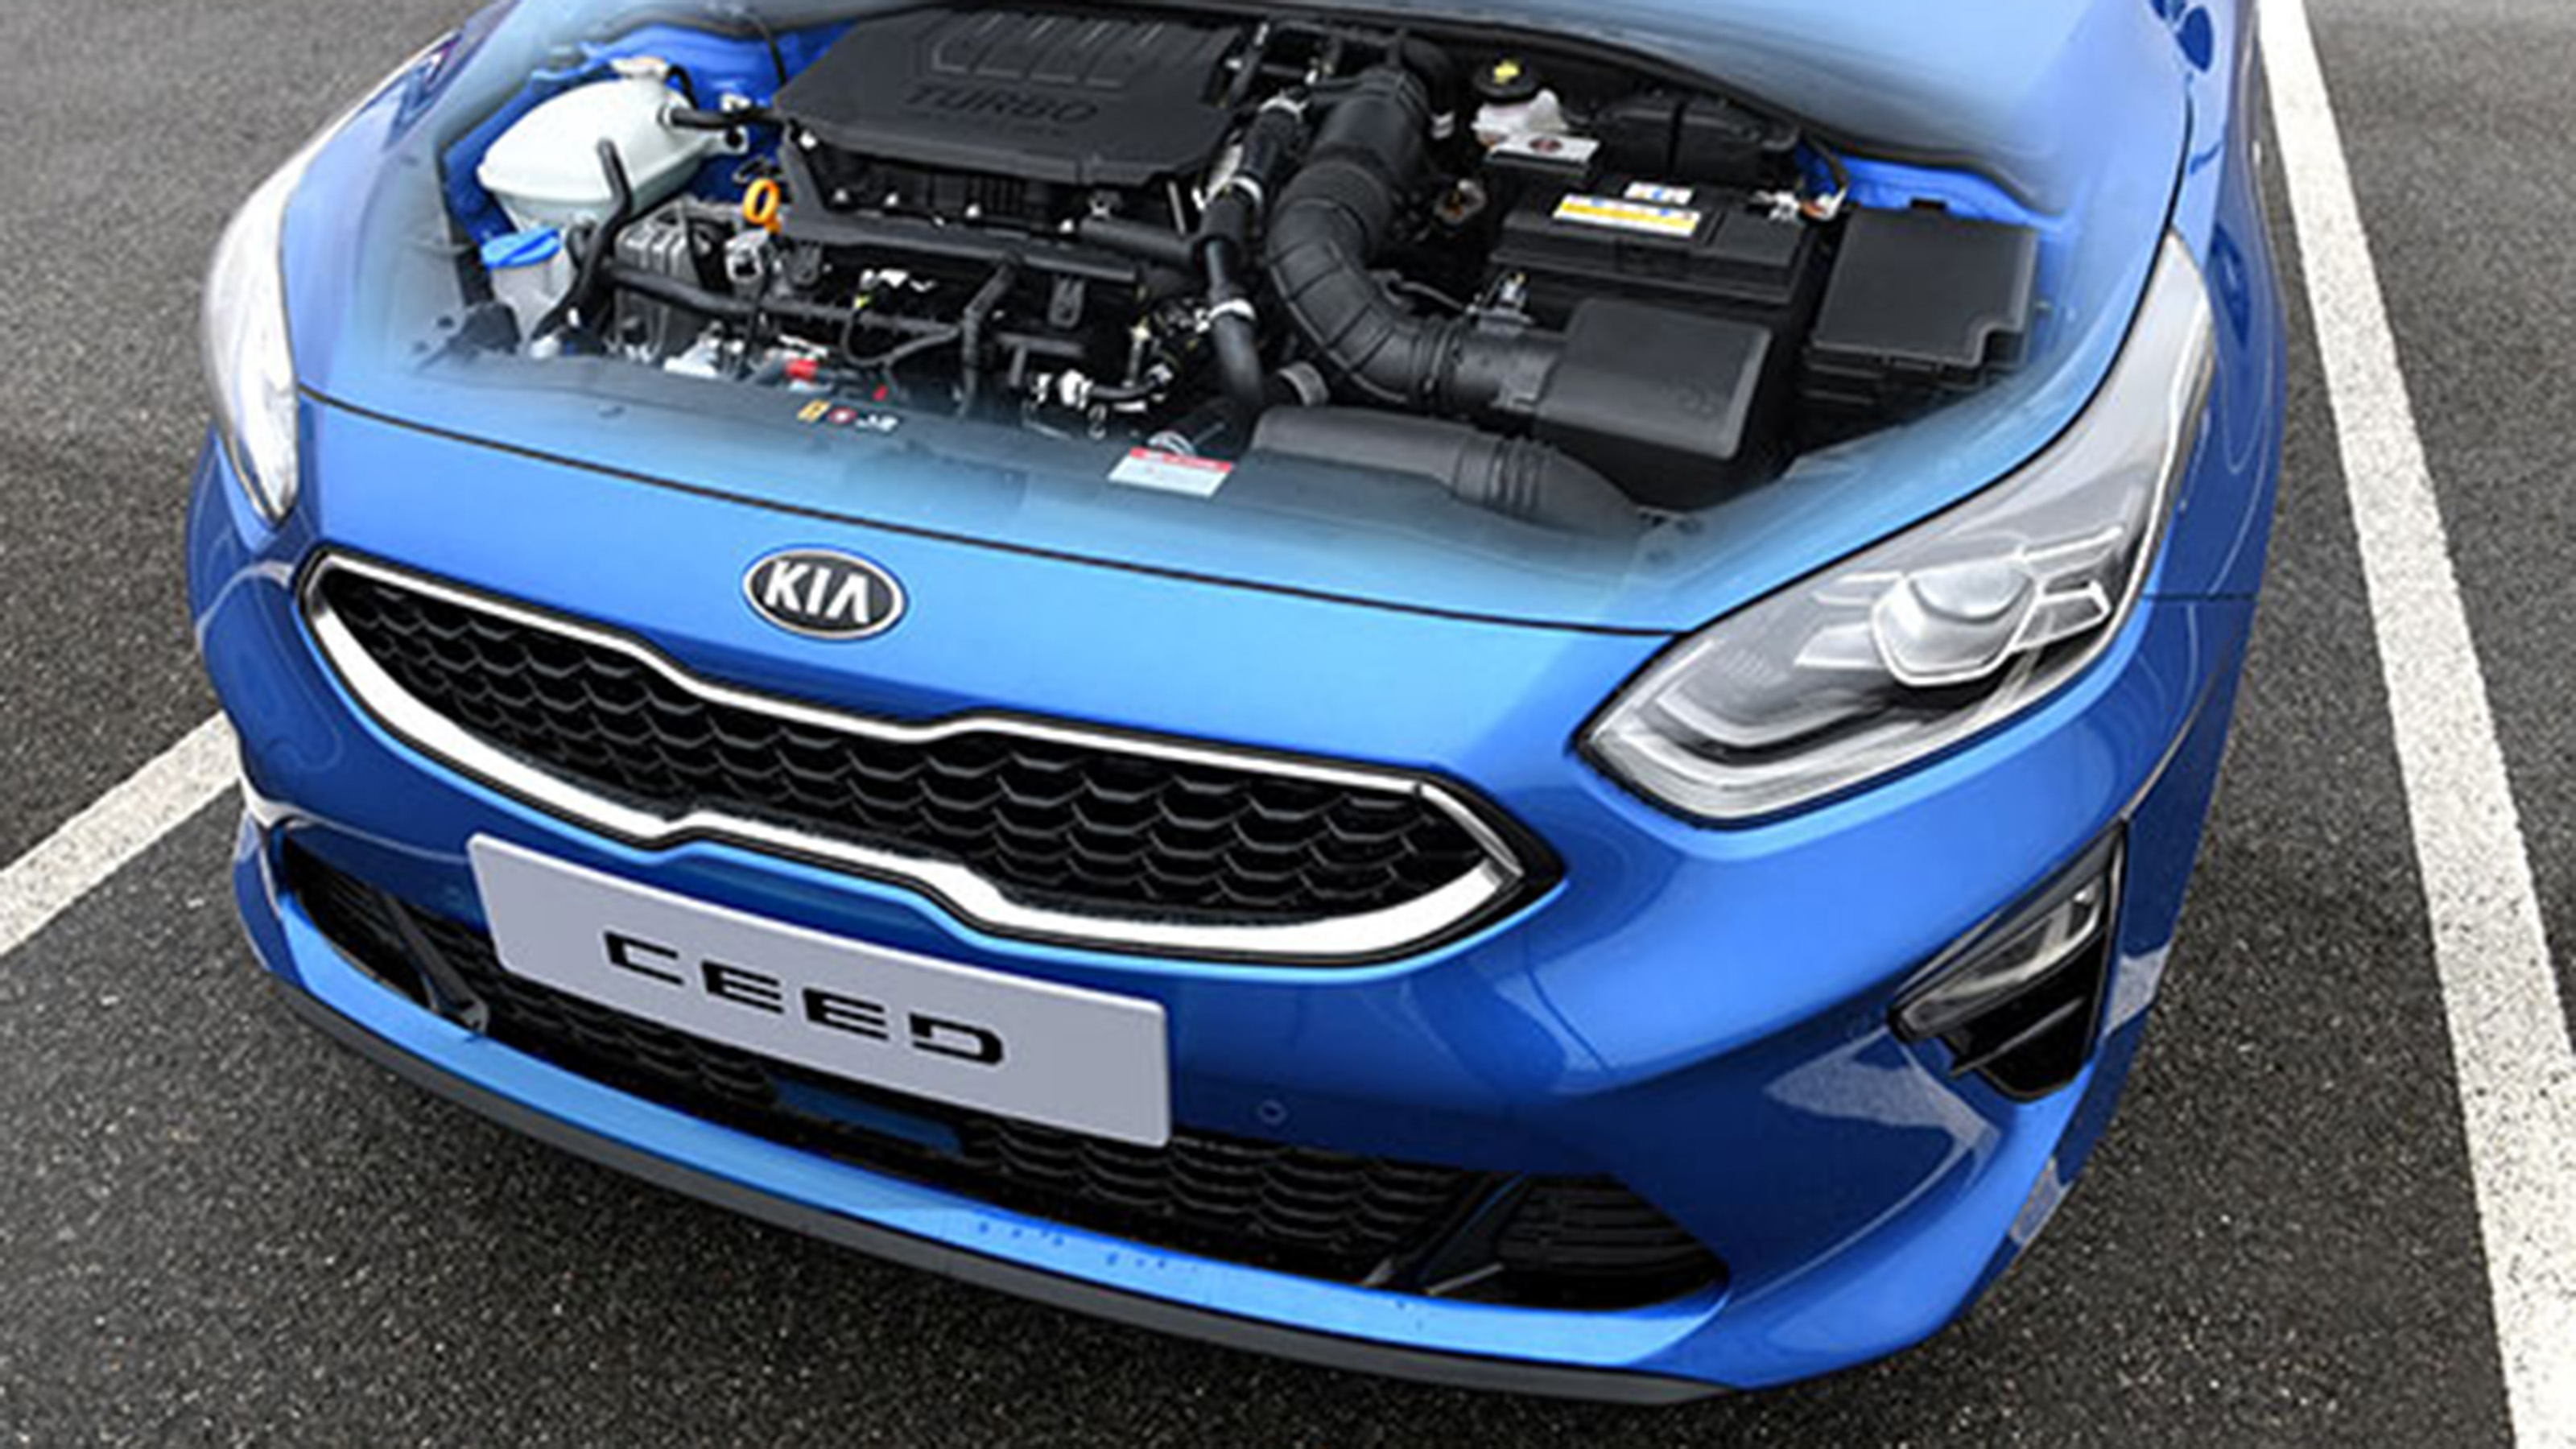 21 Kia Ceed Gets New 1 5 Litre Petrol Engine Carbuyer